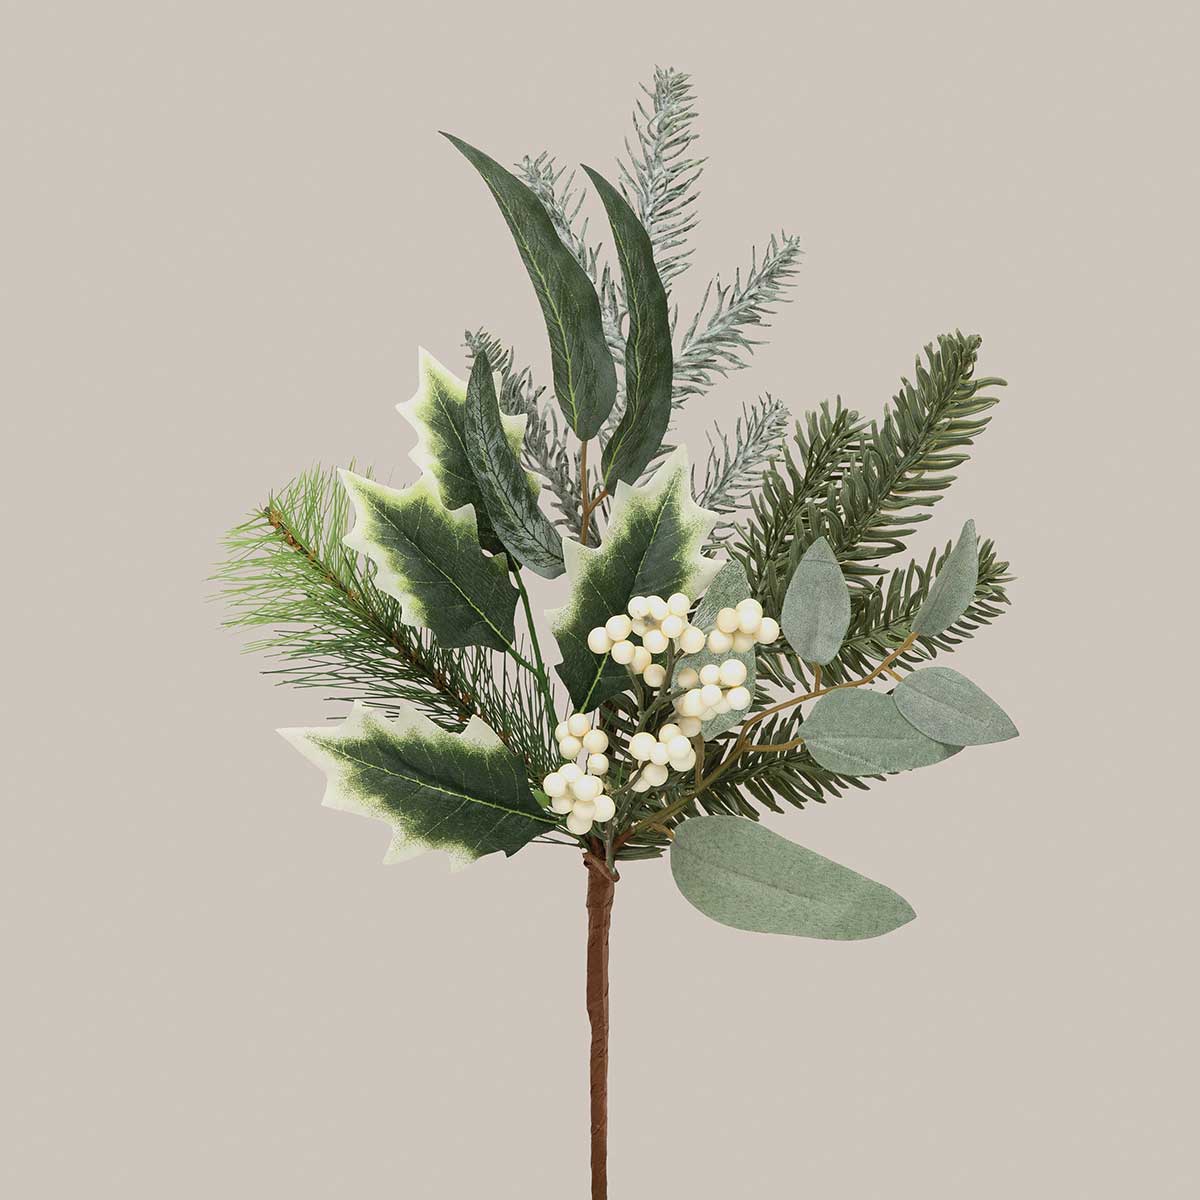 PIK PINE/WHITE BERRIES/HOLLY 10IN X 18IN WHITE/GREEN - Click Image to Close